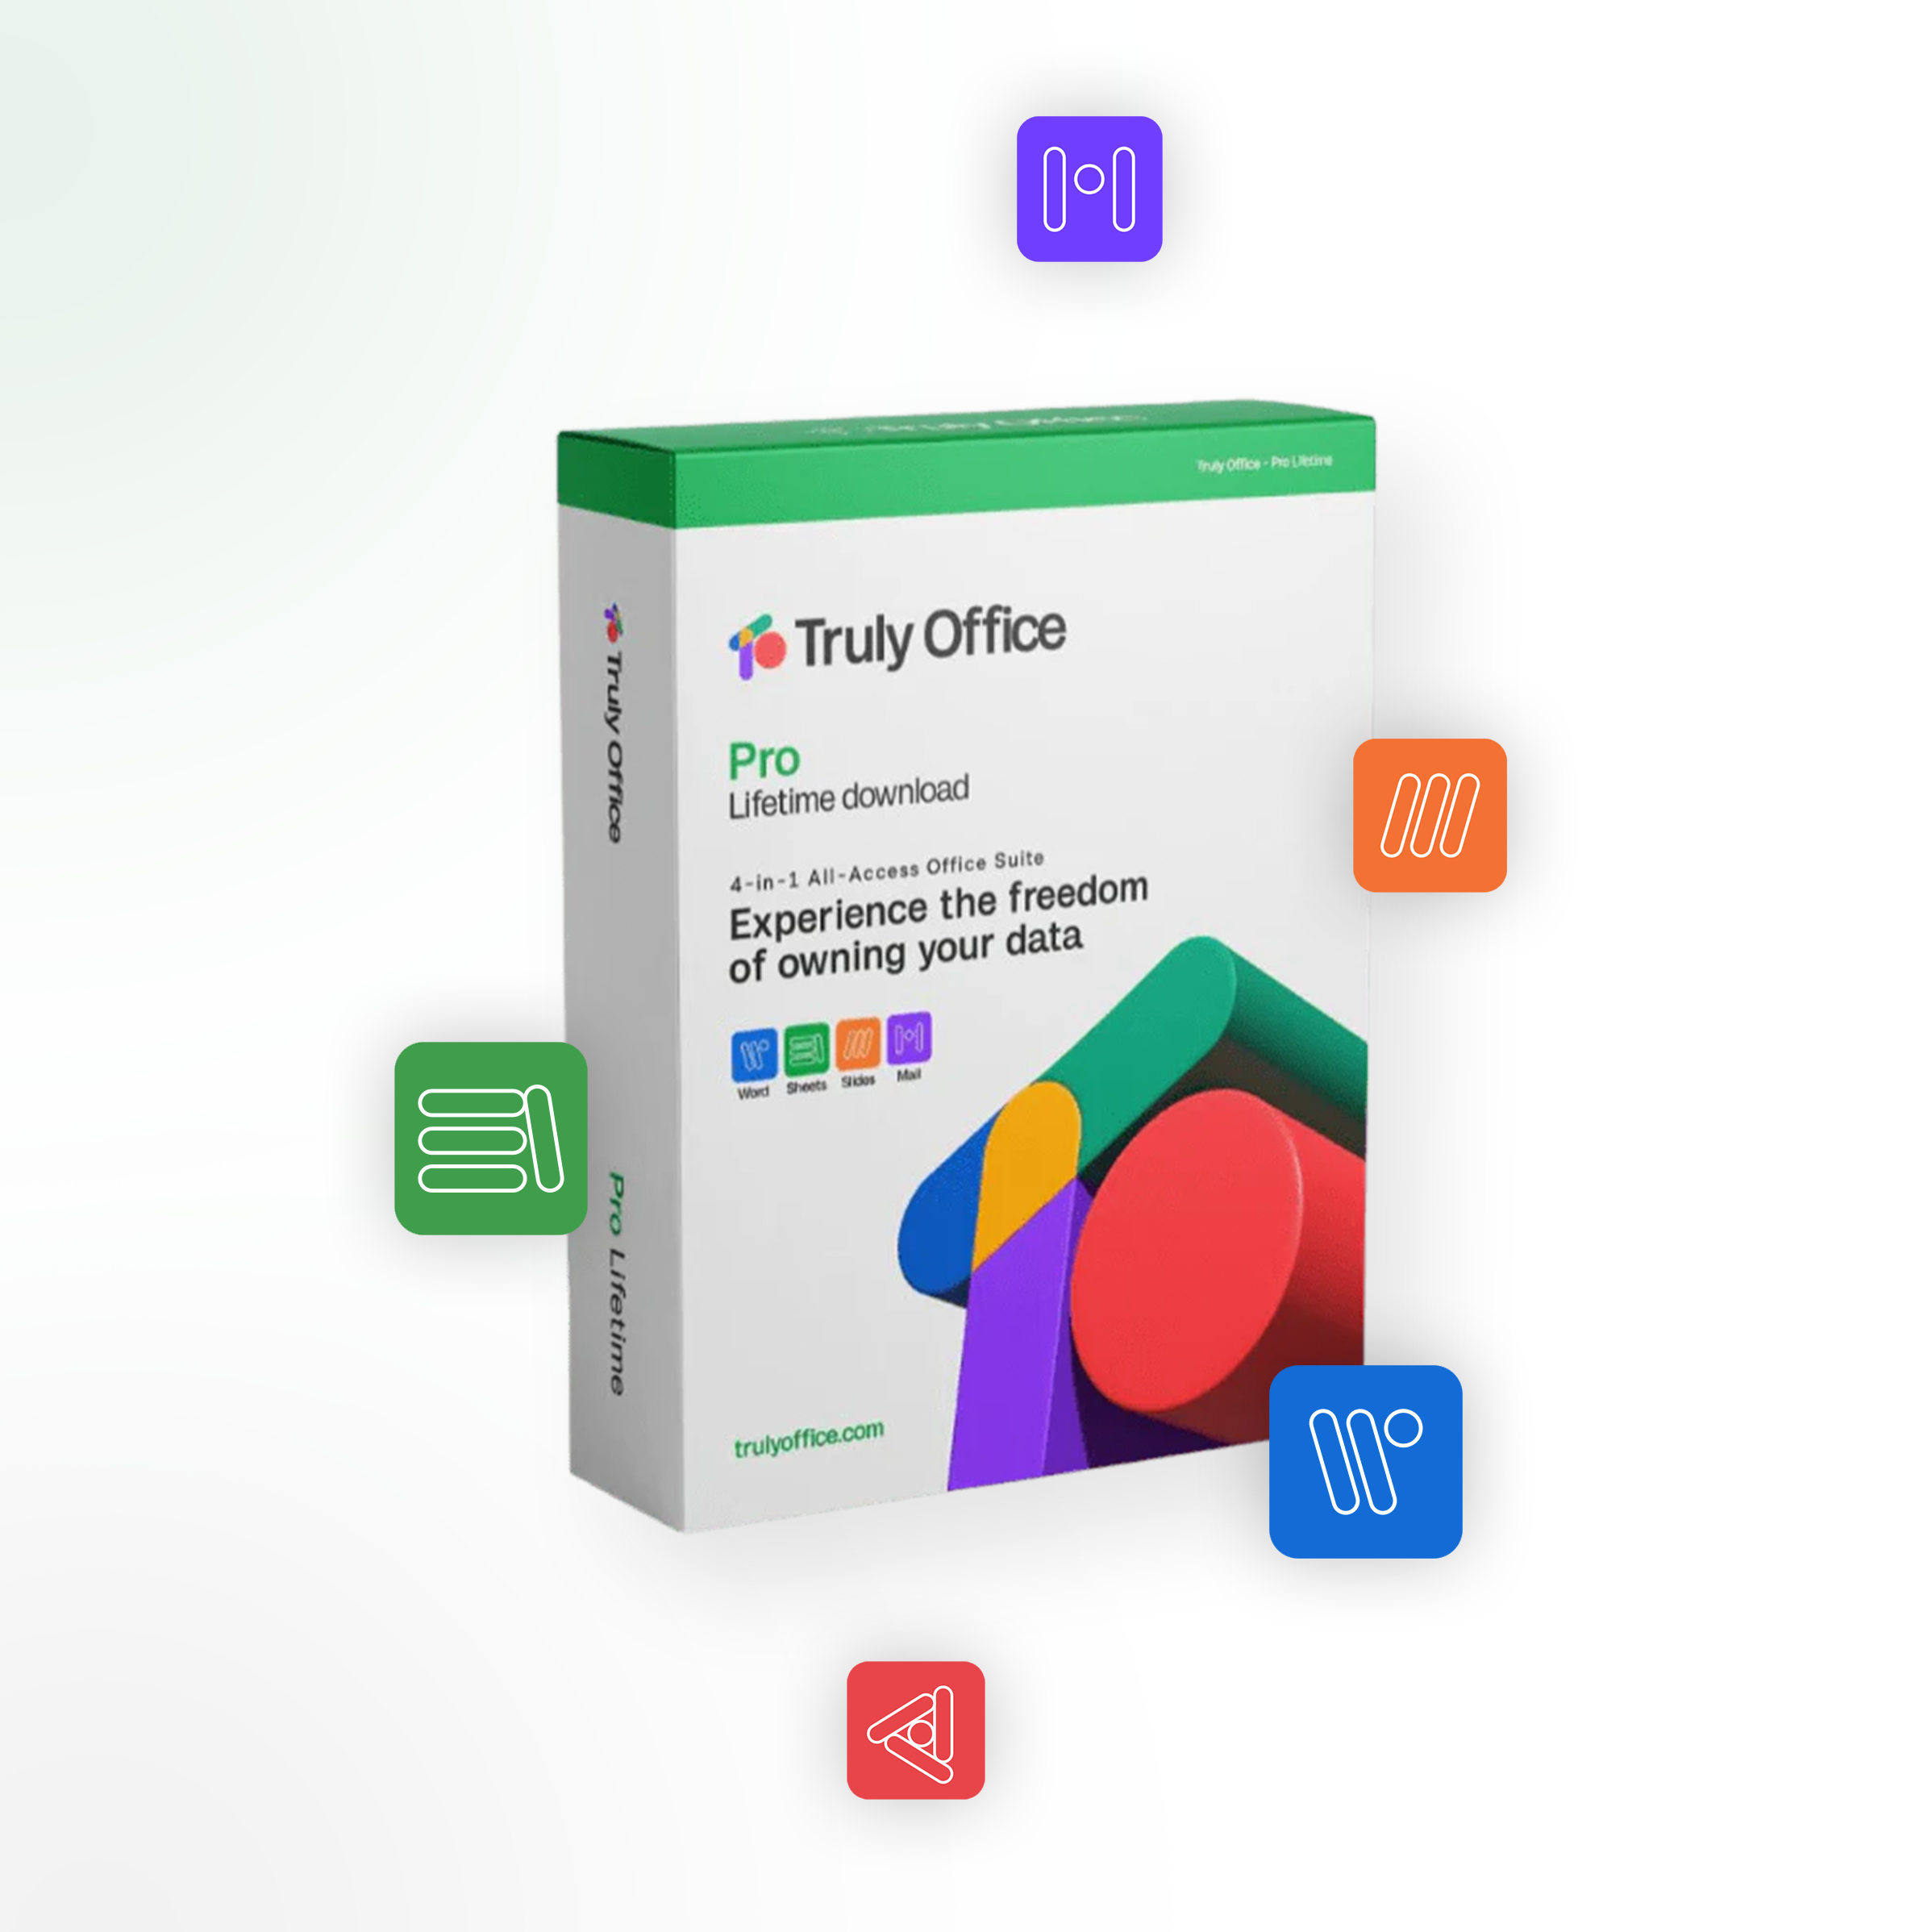 Maximize Efficiency with Truly Office's Advanced Features